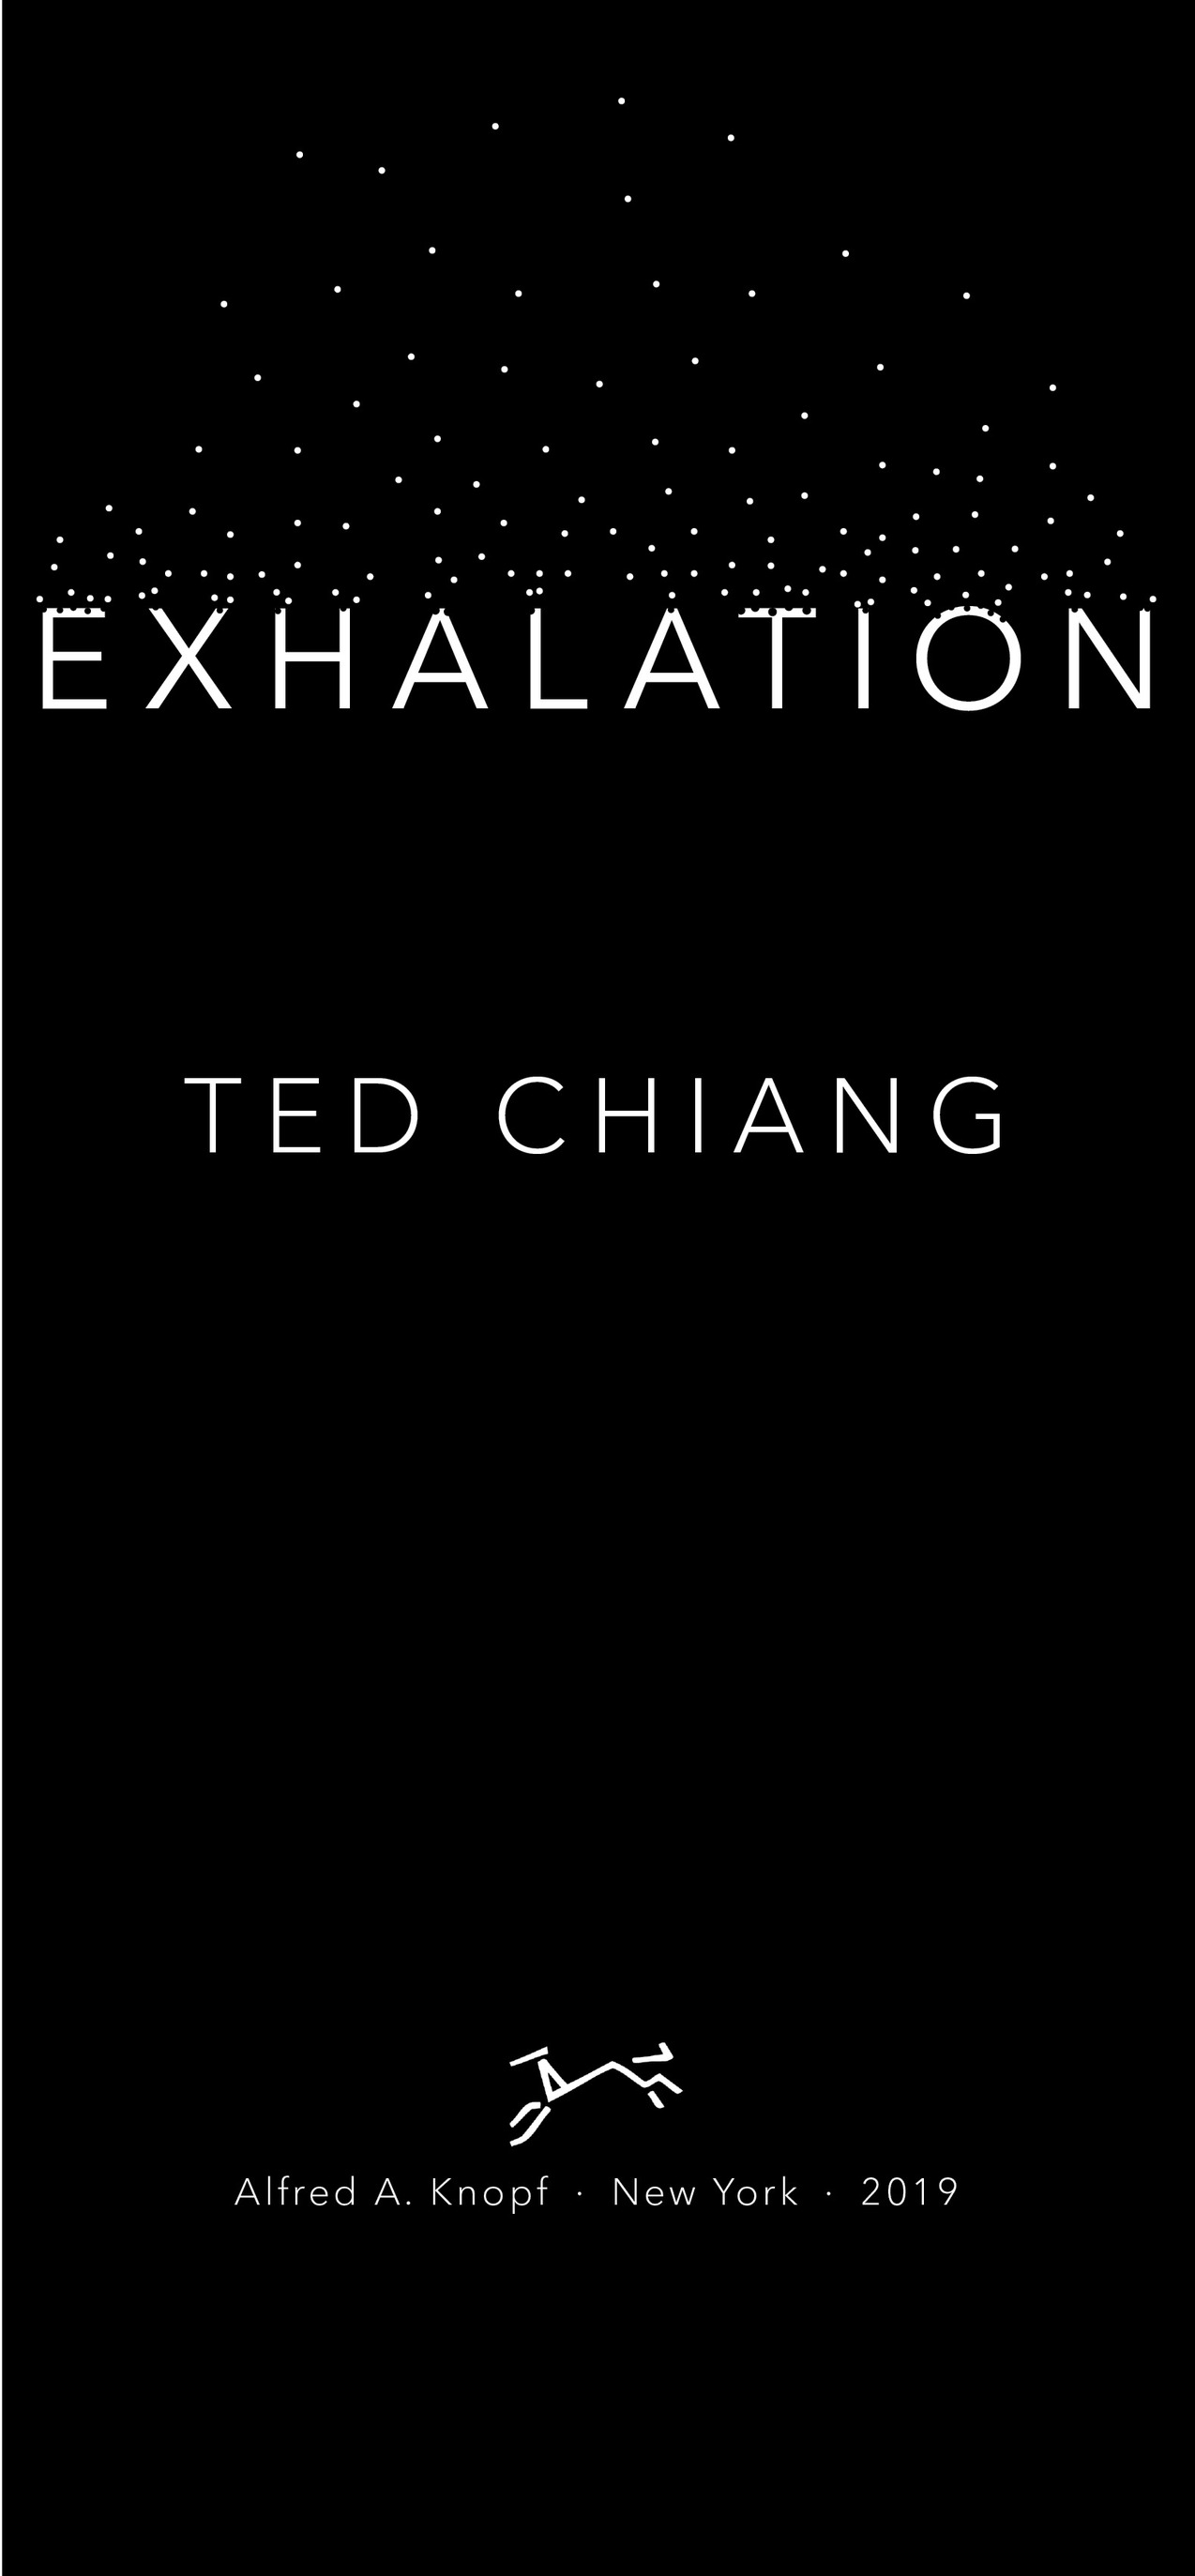 Book Title, Exhalation, Subtitle, Stories, Author, Ted Chiang, Imprint, Knopf